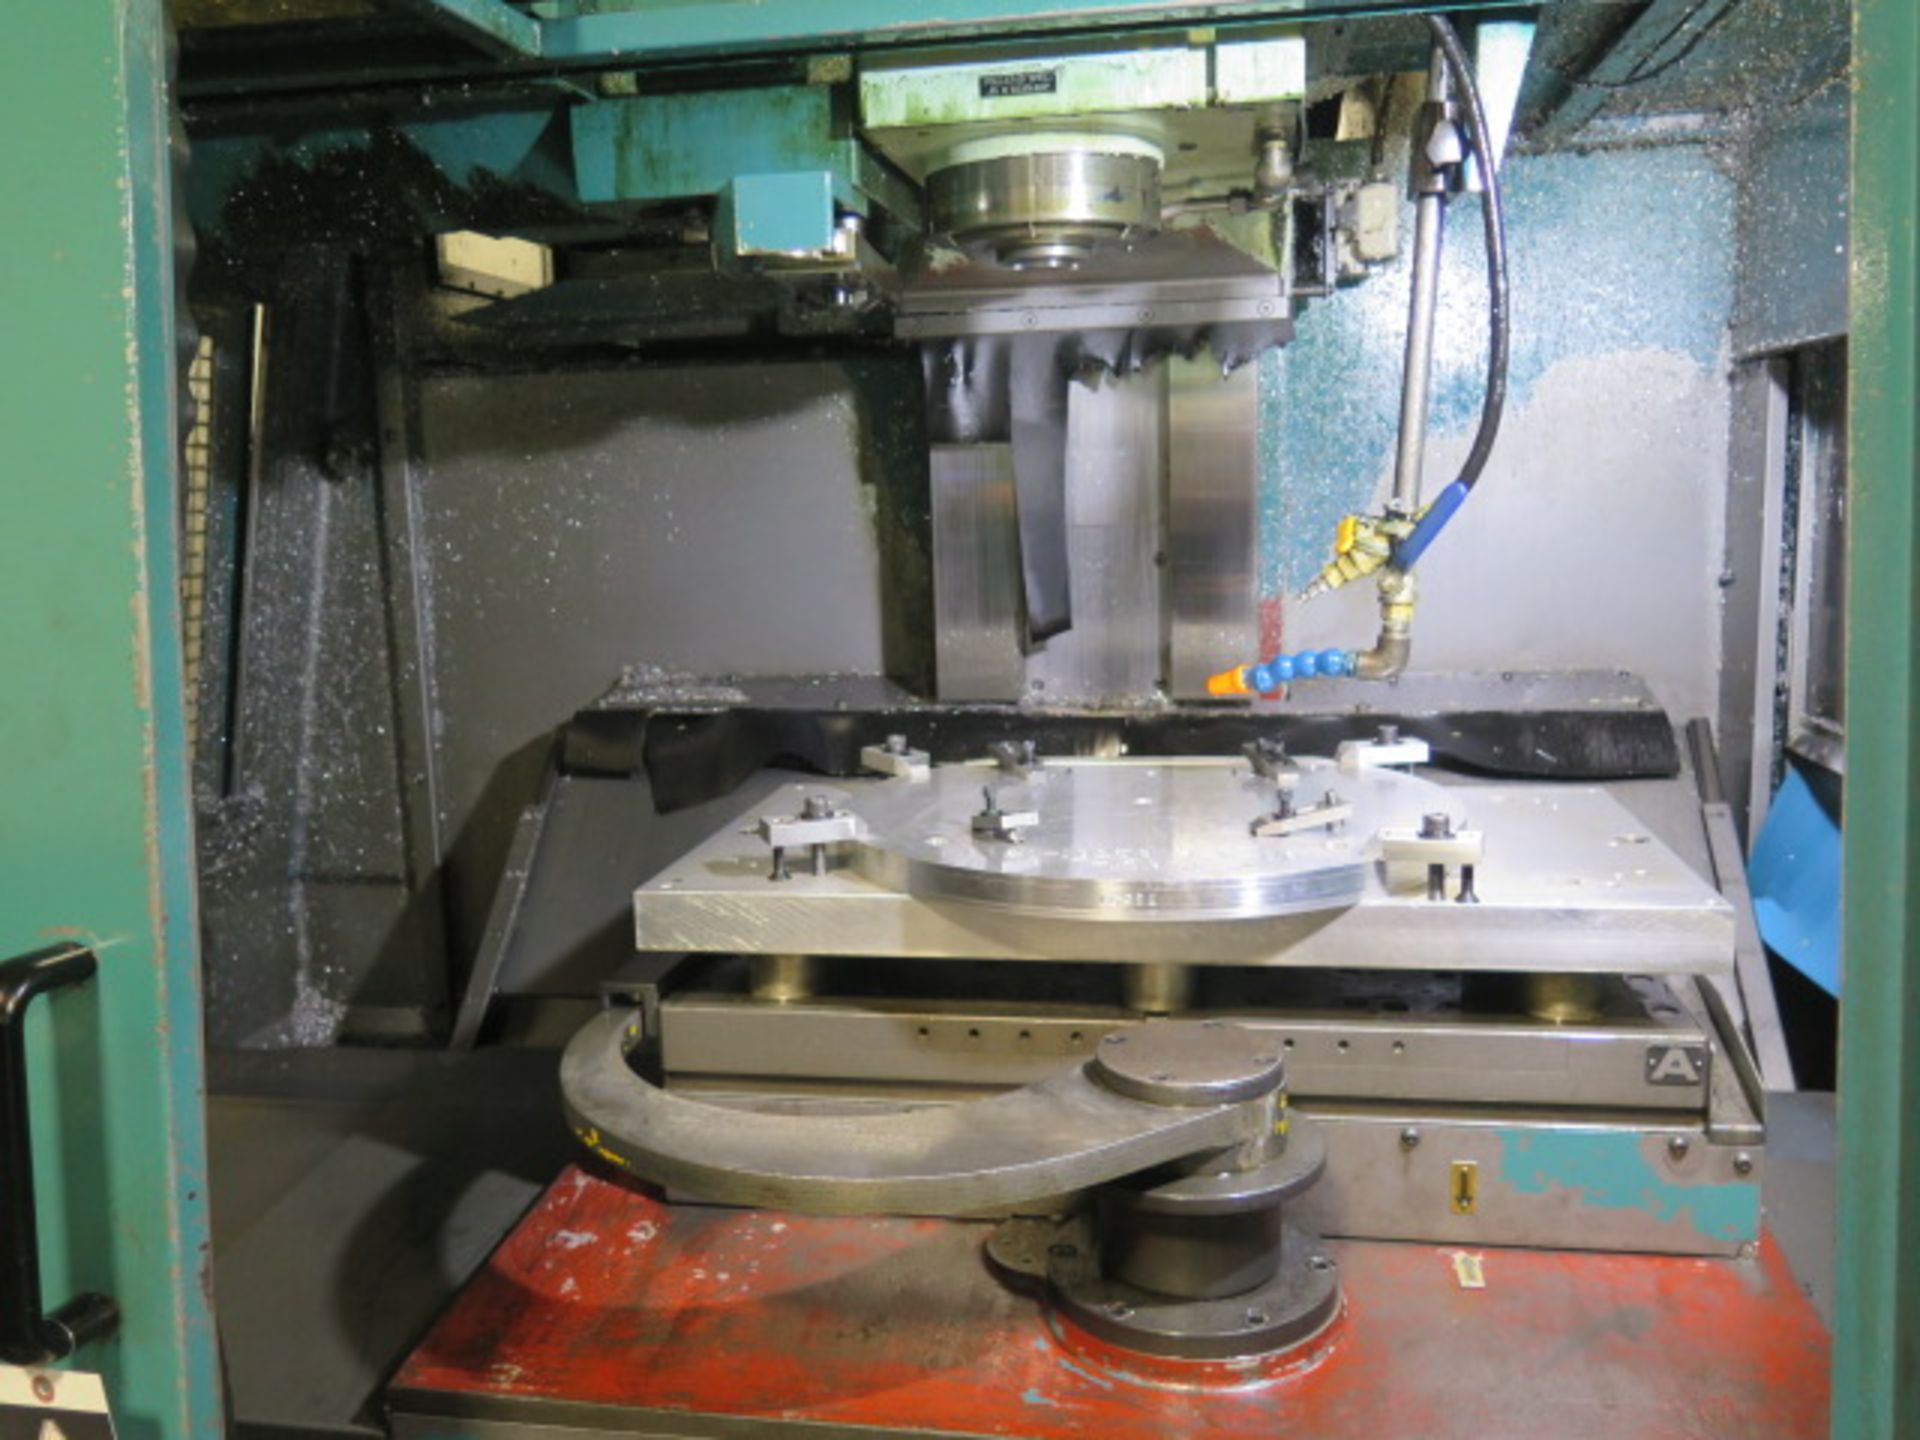 Matsuura RA-3F 2-Pallet CNC Vertical Machining Center s/n 930210424 w/ Yasnac i-80 Controls, Hand Wh - Image 7 of 20